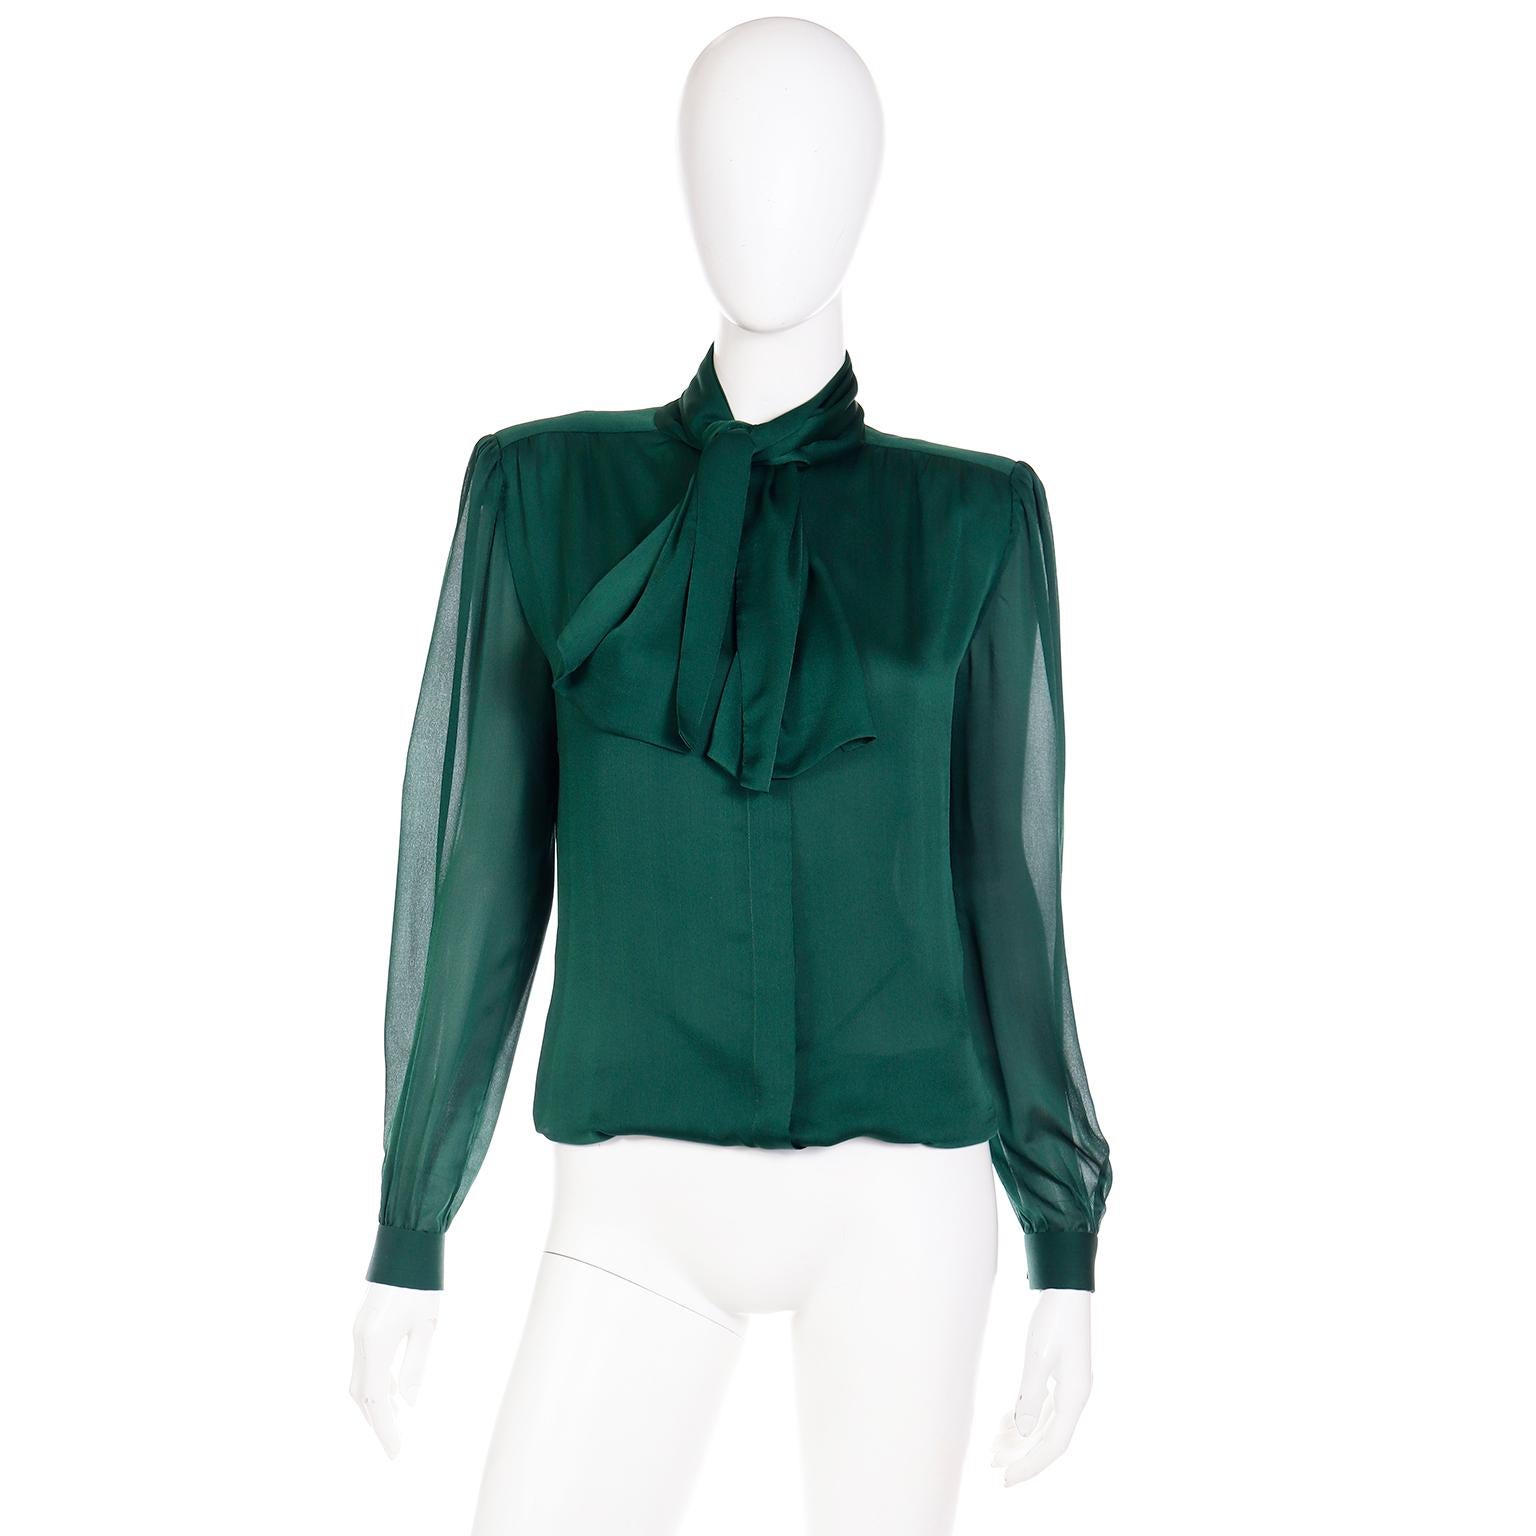 This is a luxe silk vintage Valentino Couture green silk blouse with an attached sash style neck tie that can be tied in a knot or bow. This beautiful blouse has sewn in shoulder pads for slight structure that could easily be removed. The sleeve